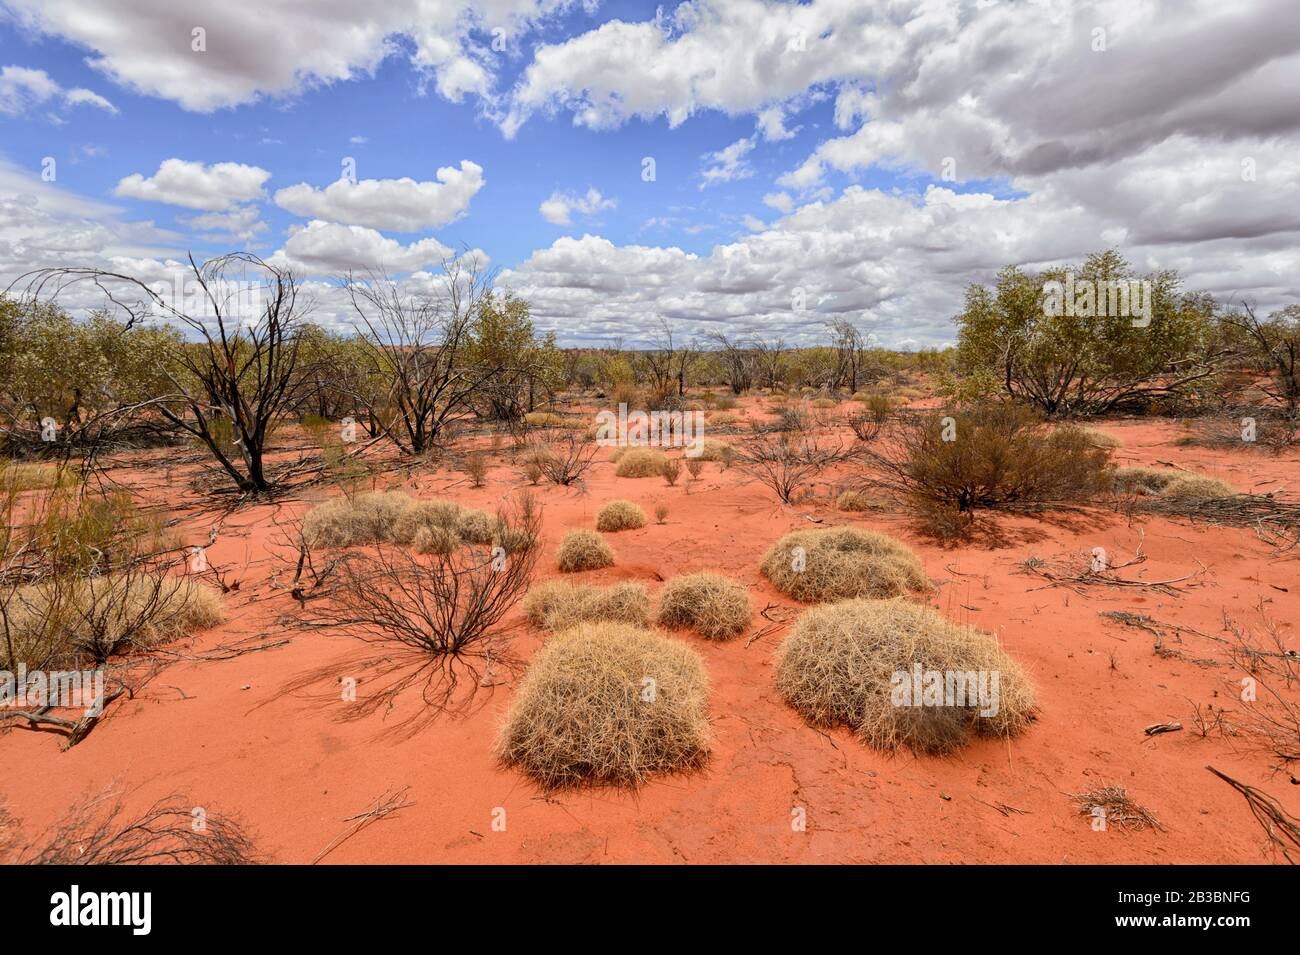 Stunning Outback landscape with red dirt and spinifex along the Stuart Highway, Northern Territory, NT, Australia Stock Photo